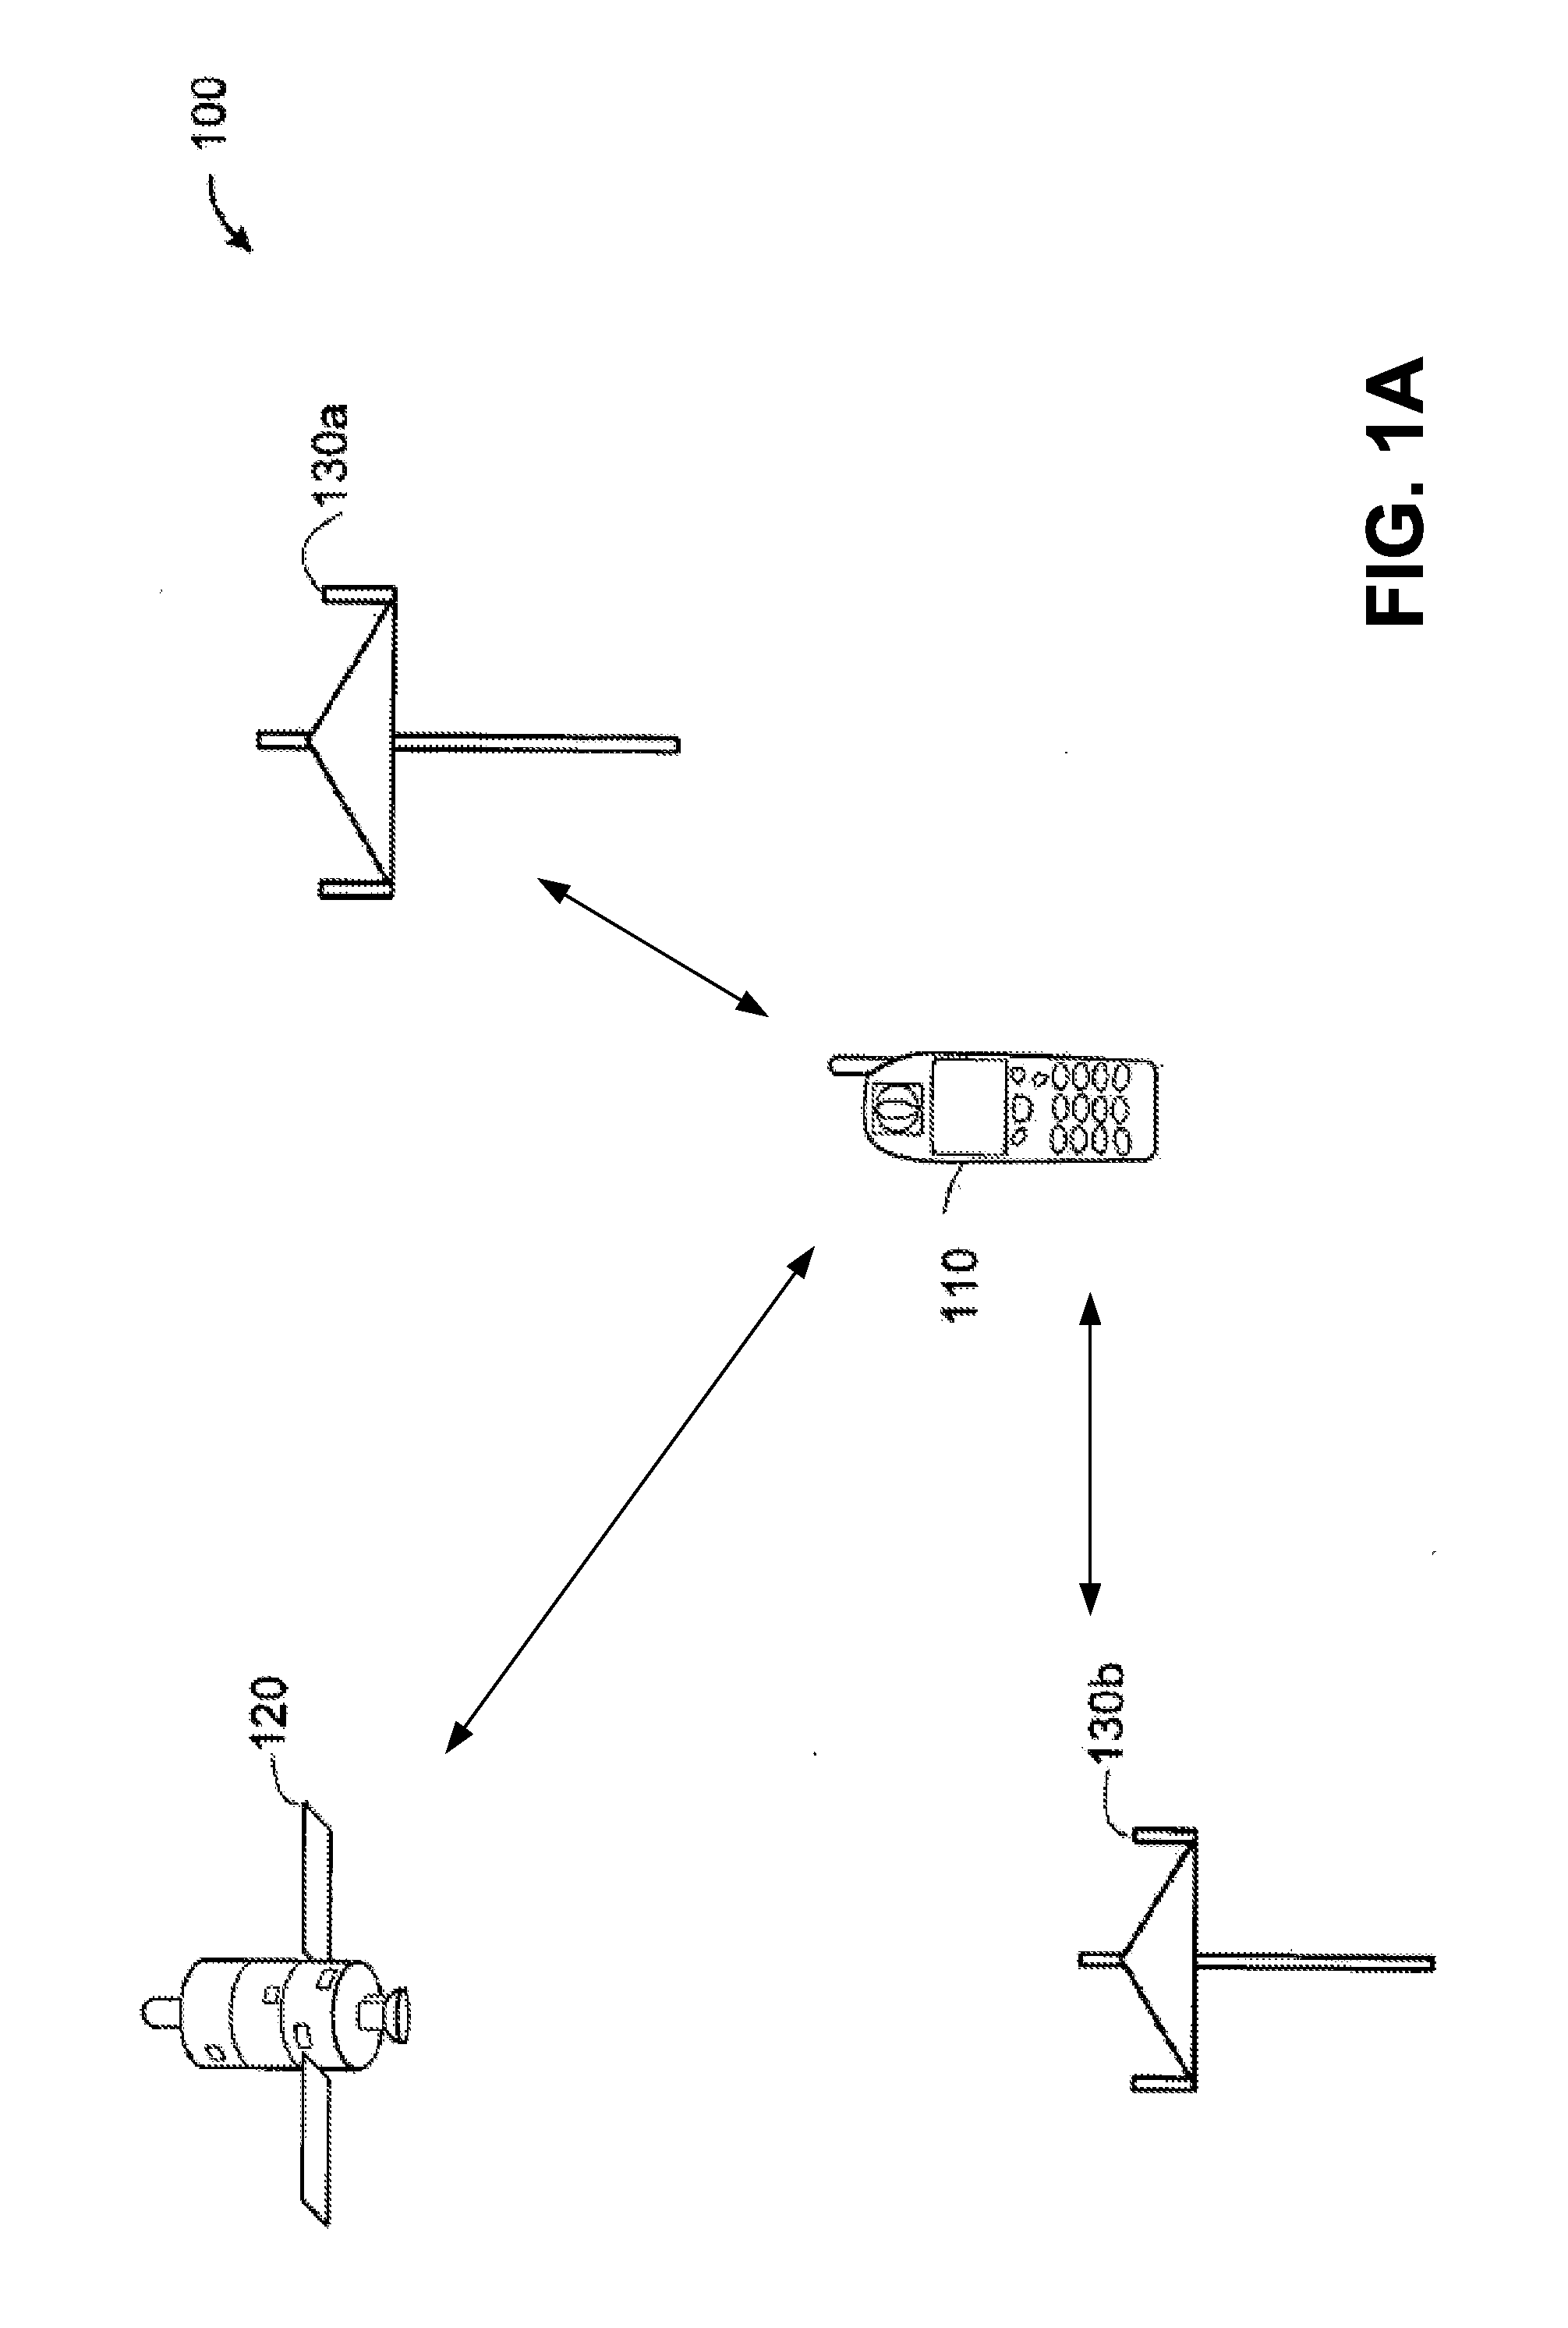 Apparatus and methods for height determination